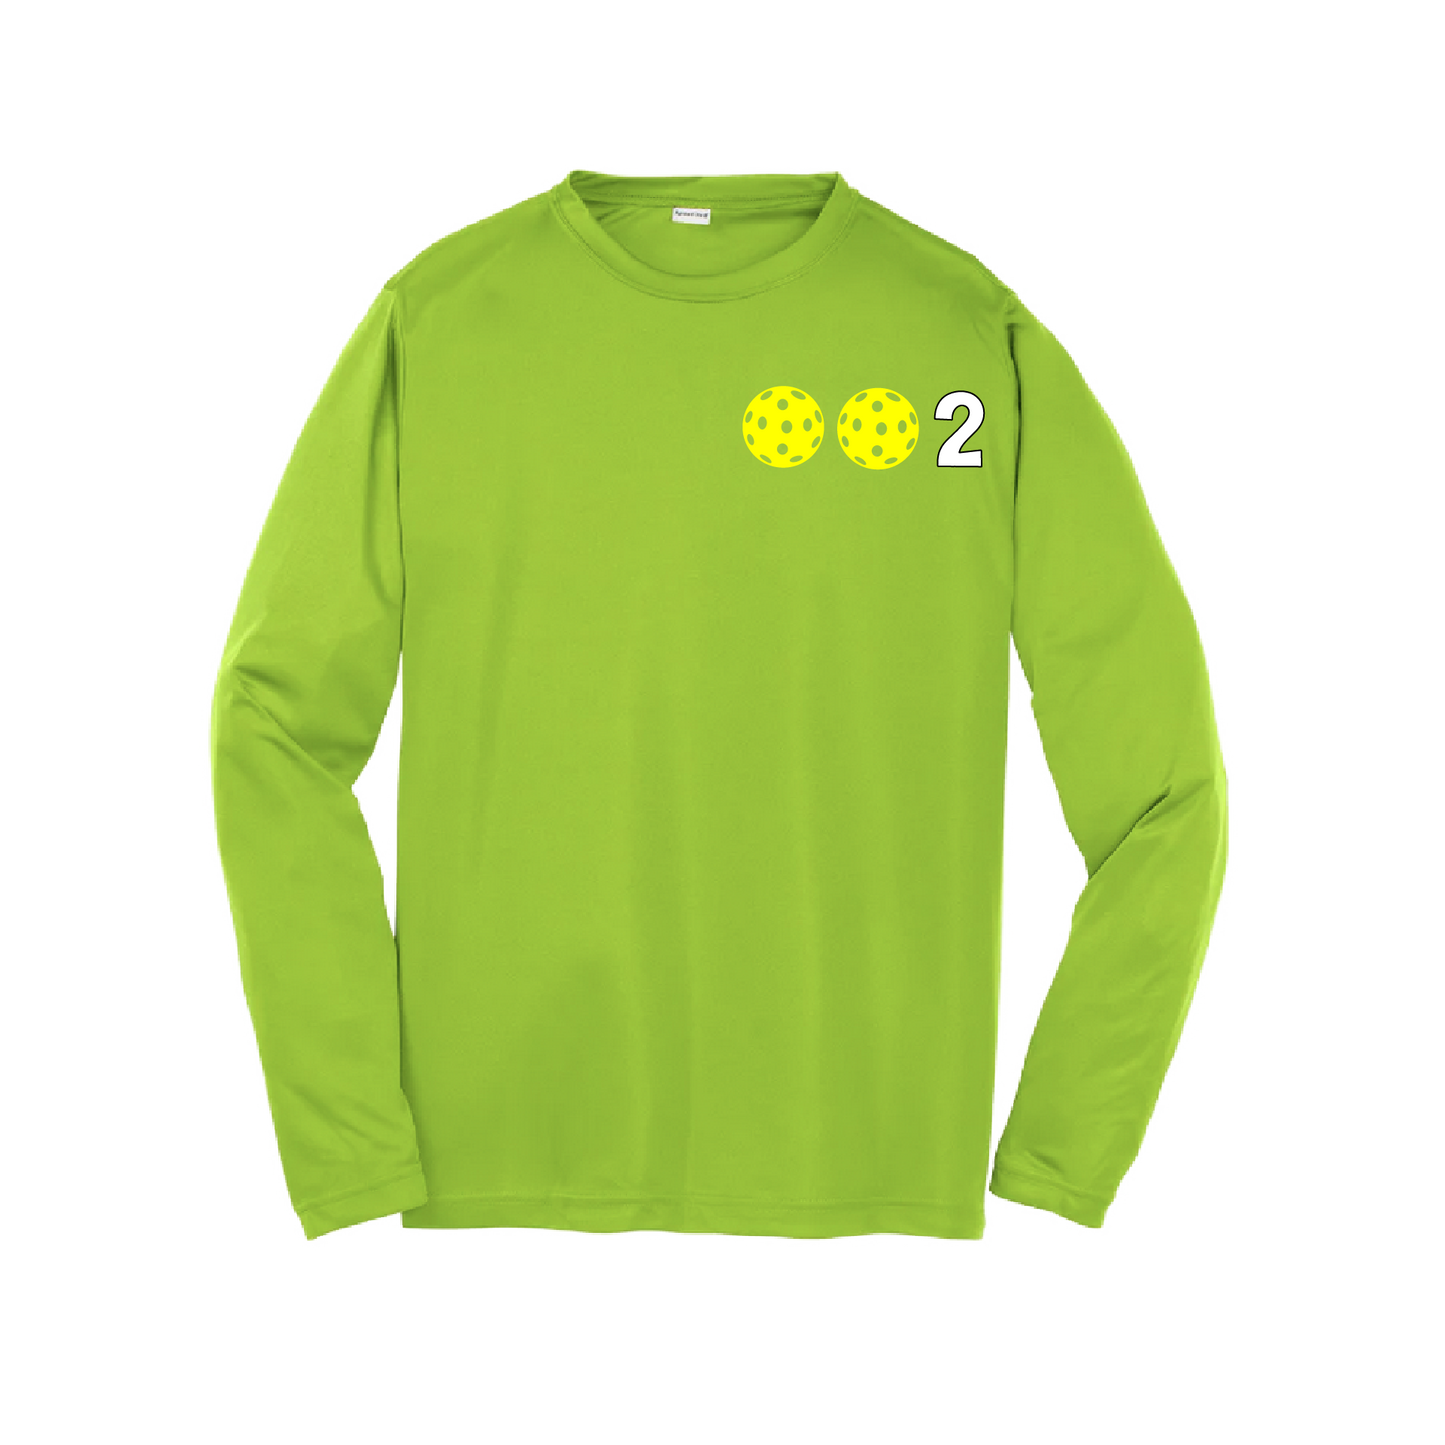 Design: 002 with Customizable Ball Colors (Yellow, Green, White)  Youth Styles: Long Sleeve (LS)  Shirts are lightweight, roomy and highly breathable. These moisture-wicking shirts are designed for athletic performance. They feature PosiCharge technology to lock in color and prevent logos from fading. Removable tag and set-in sleeves for comfort.